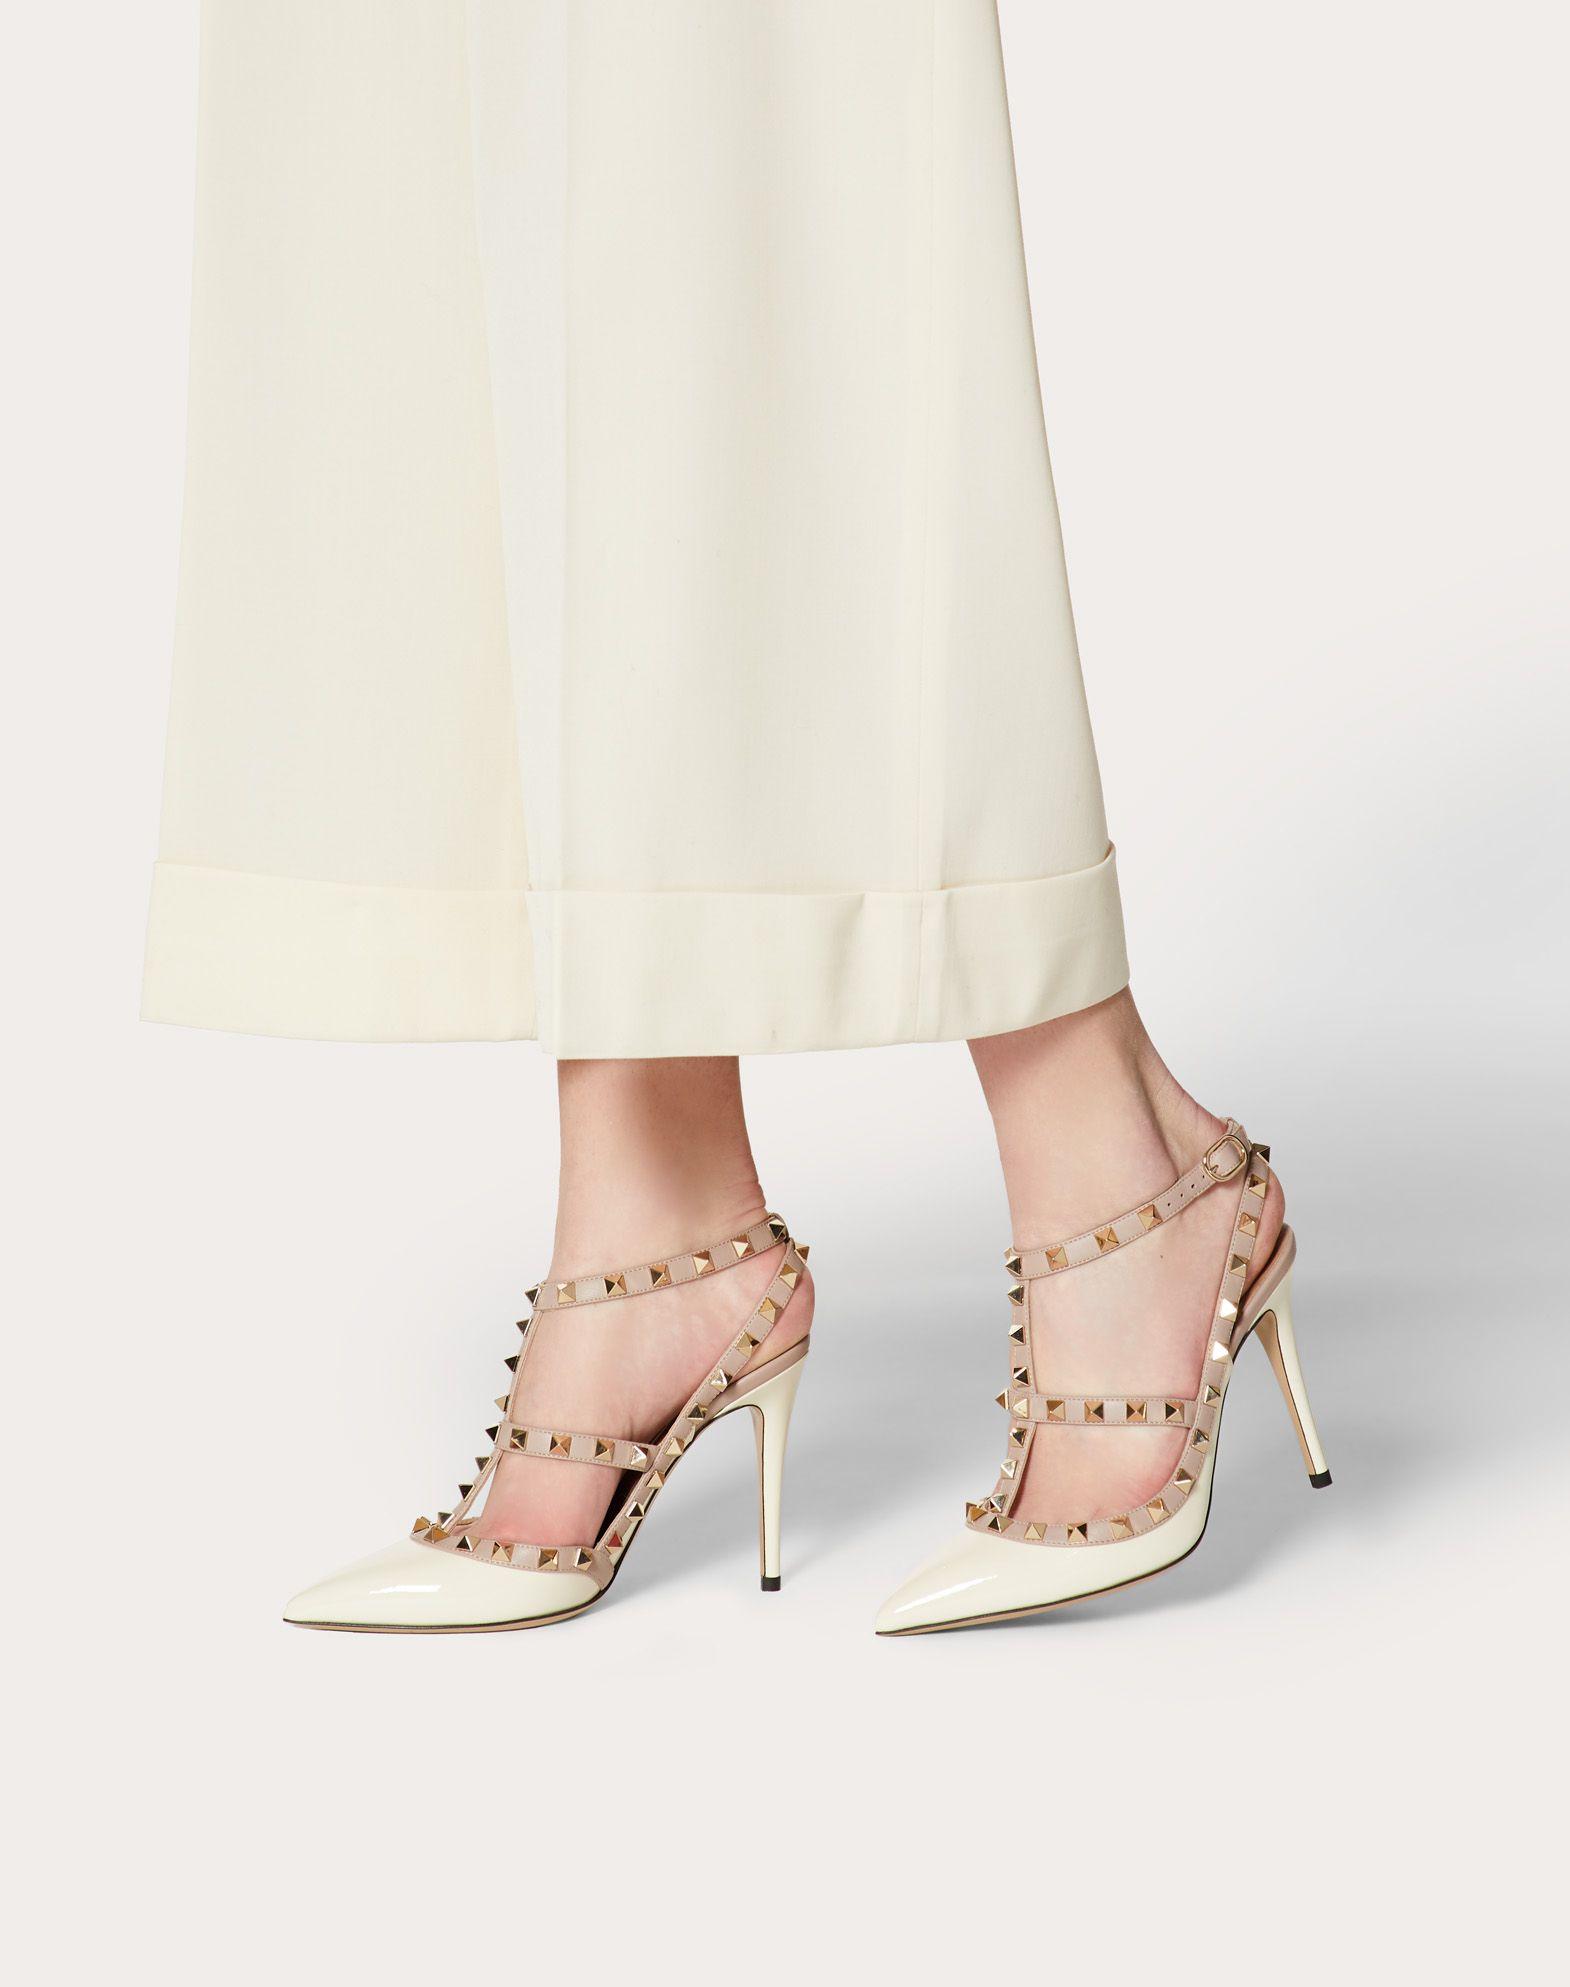 Valentino Leather Patent Rockstud Caged Pump 100mm in White - Lyst